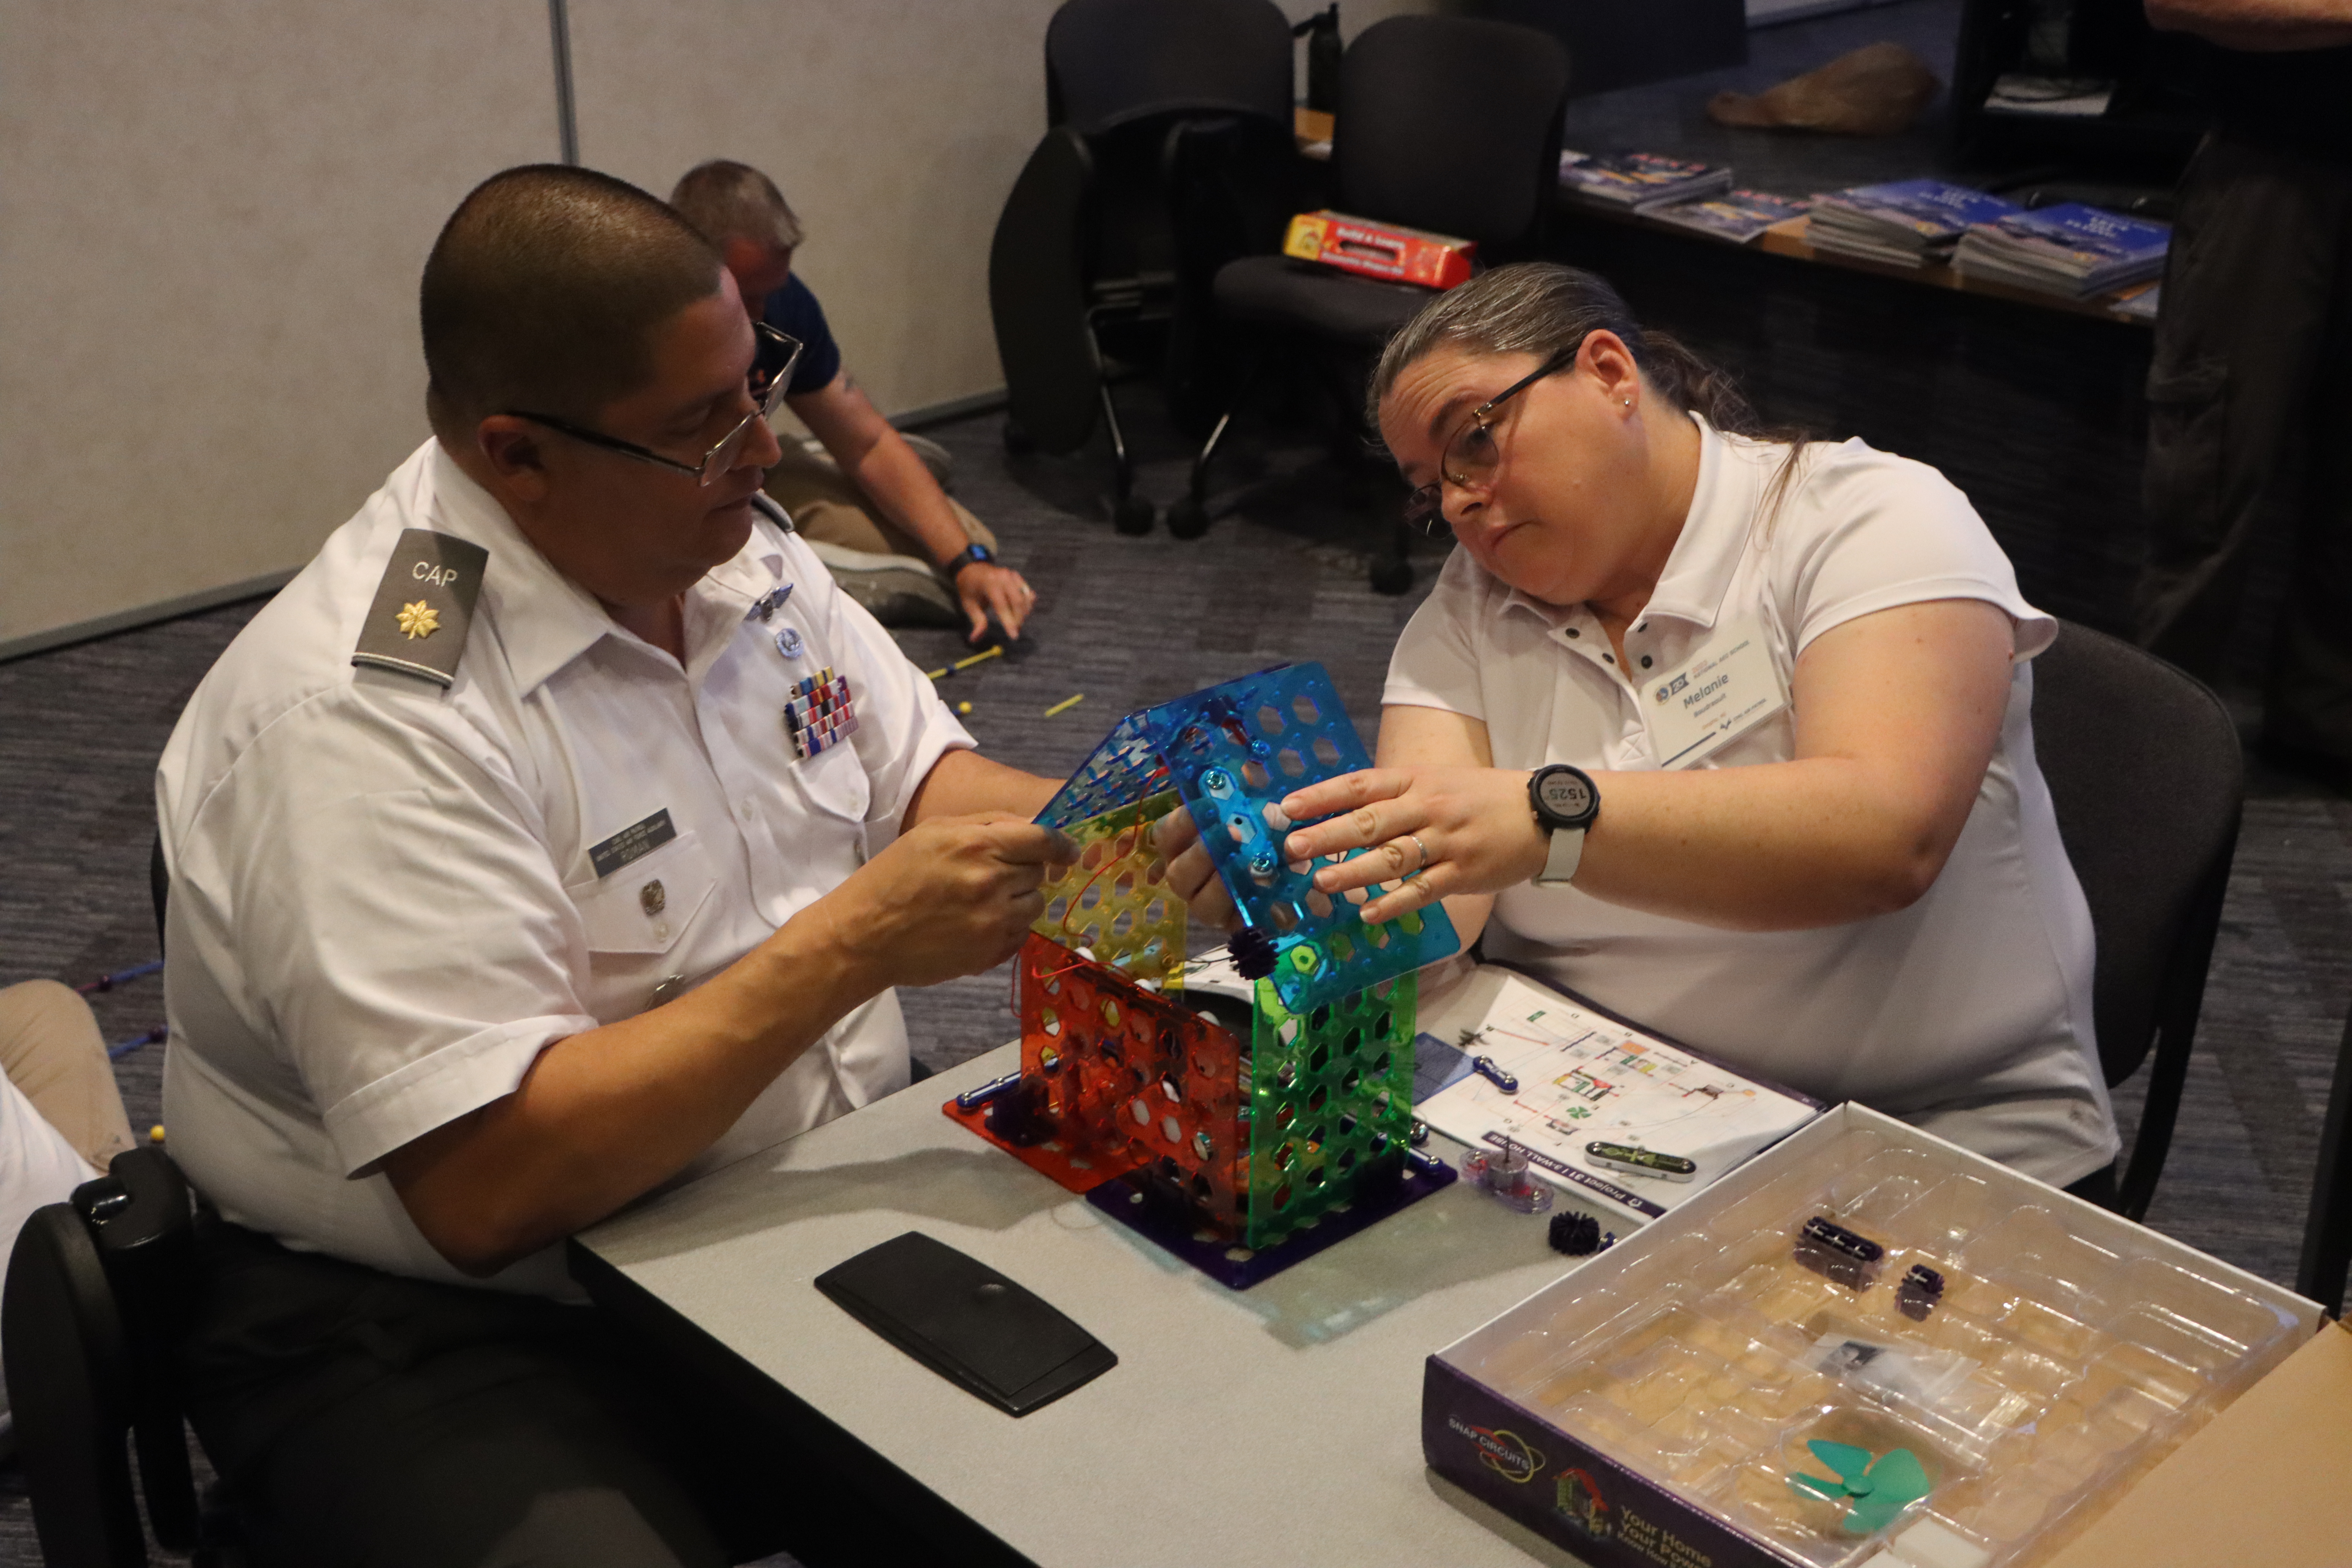 Maj Roman works on the electricity STEM kit with another AEO school participant